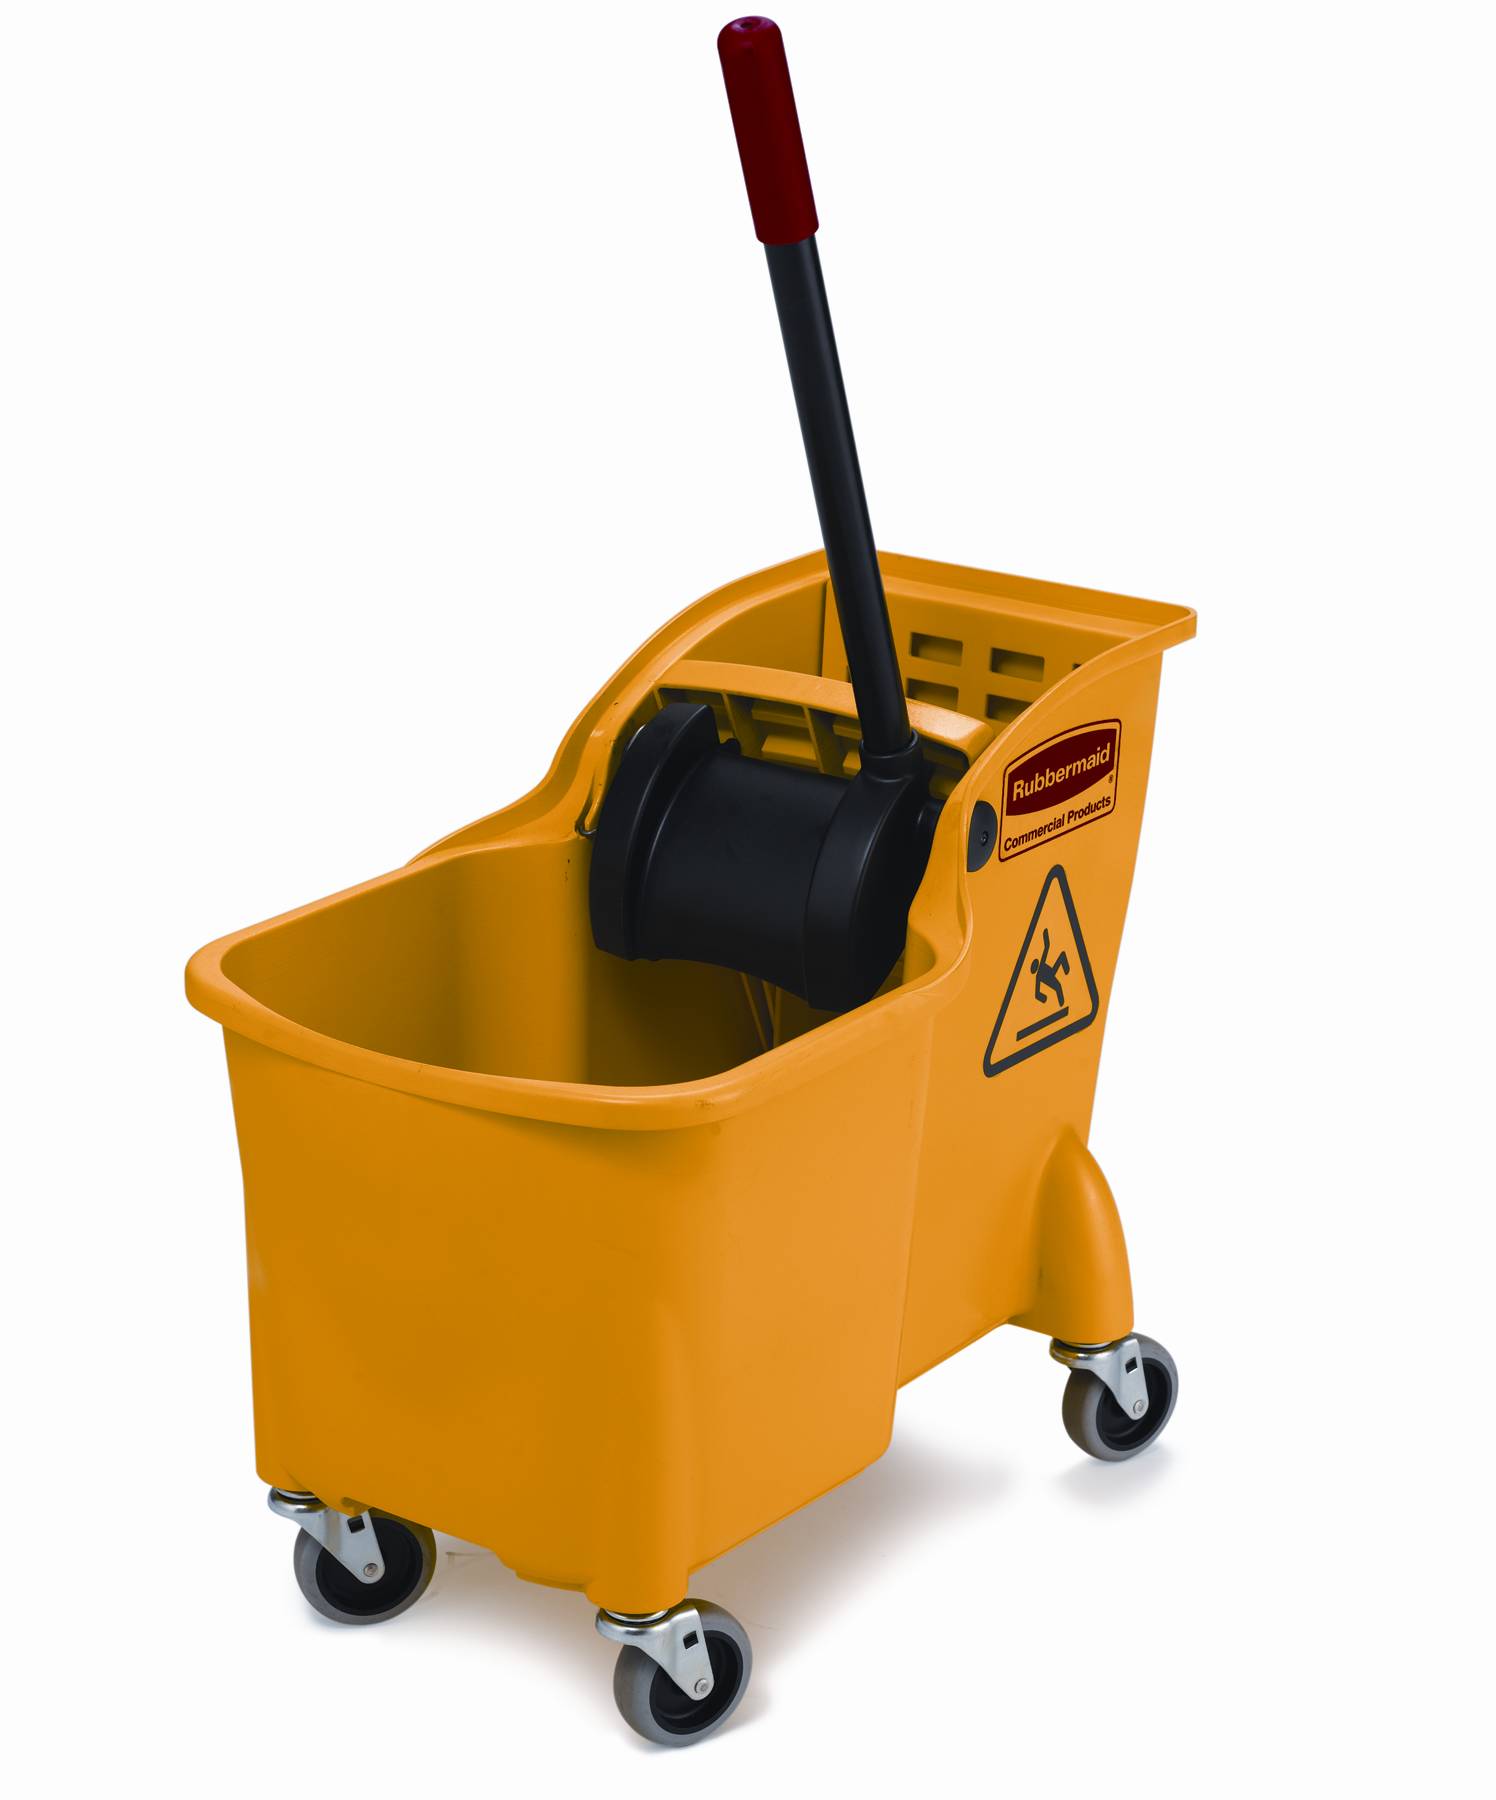 Types of Commercial Mop Buckets & Wringers, Usage & Parts